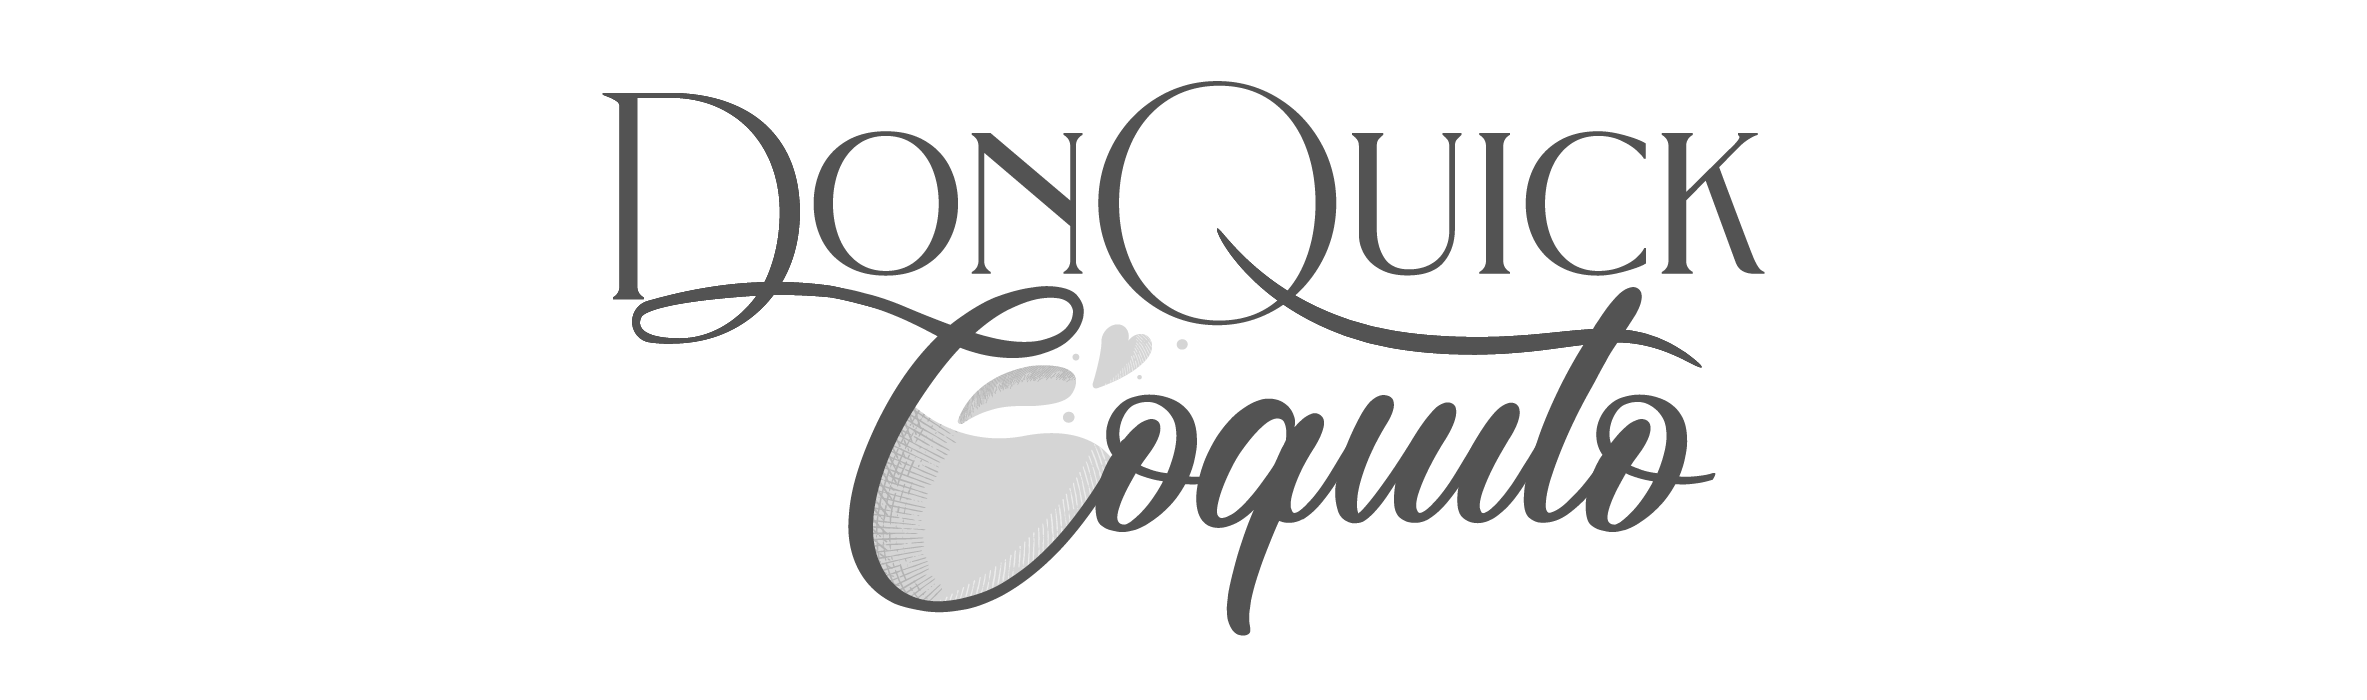 DonQuick Coquito logo_gray_port buttons.png